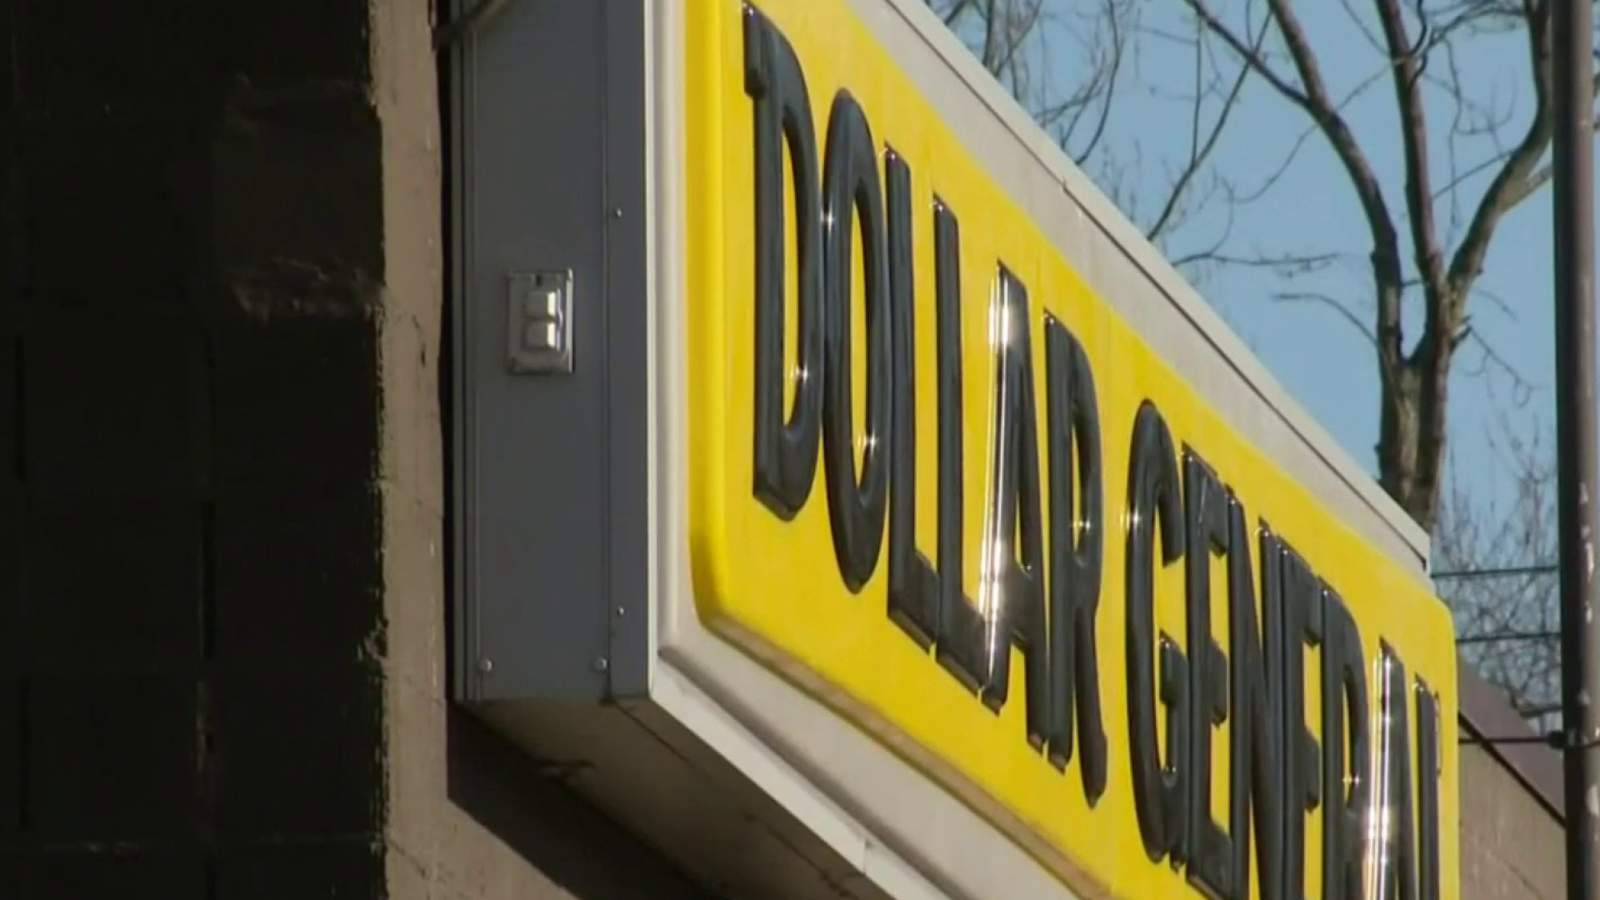 Couple robbed, assaulted outside dollar store on Detroit’s east side